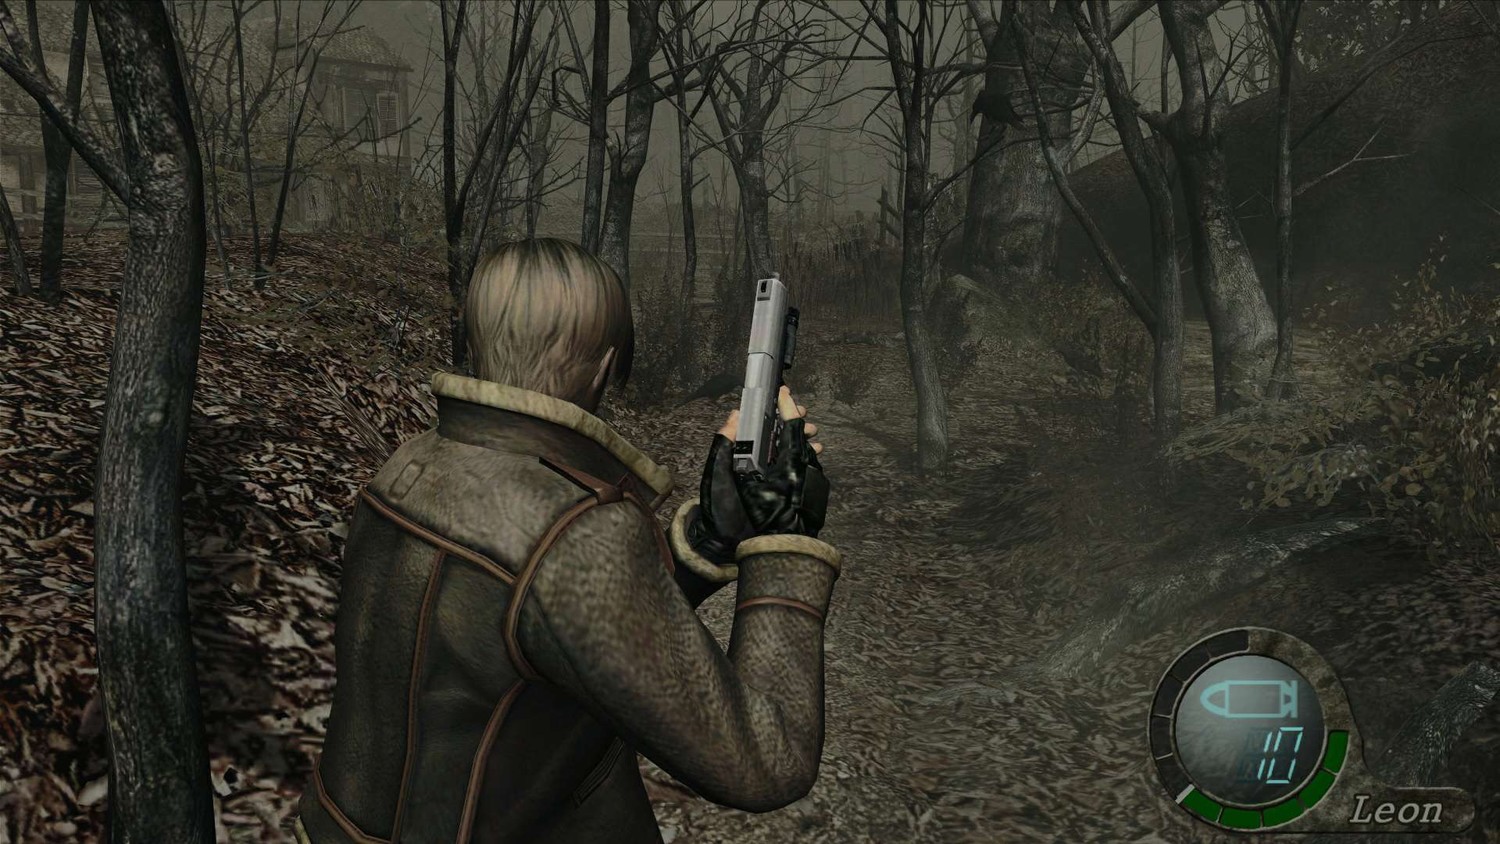 Steam resident evil 4 ultimate hd фото 102